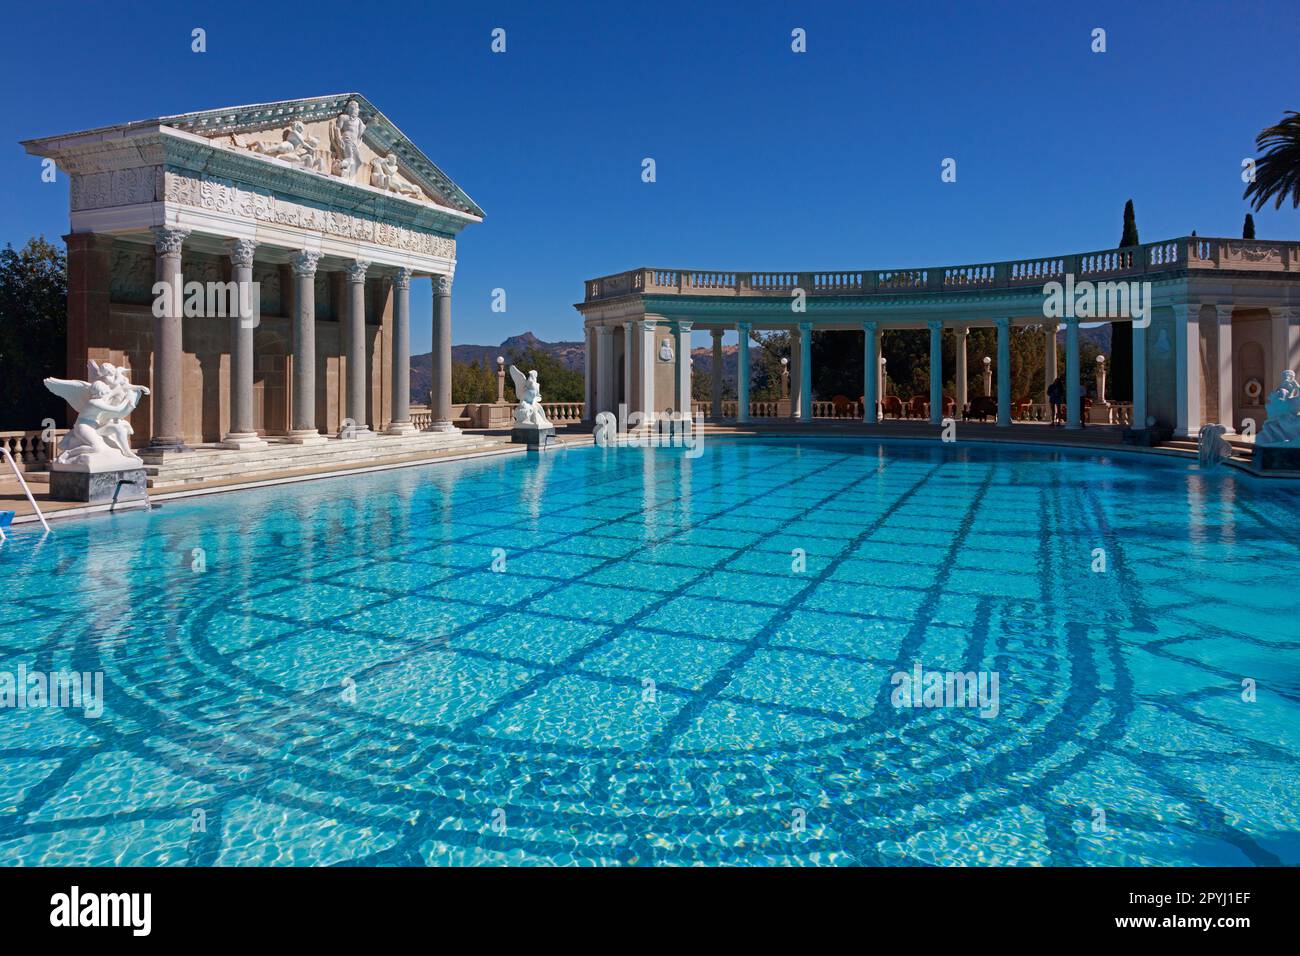 Neptune swimming pool at Hearst Castle, built by William Randolph Hearst,  located in San Simeon California Stock Photo